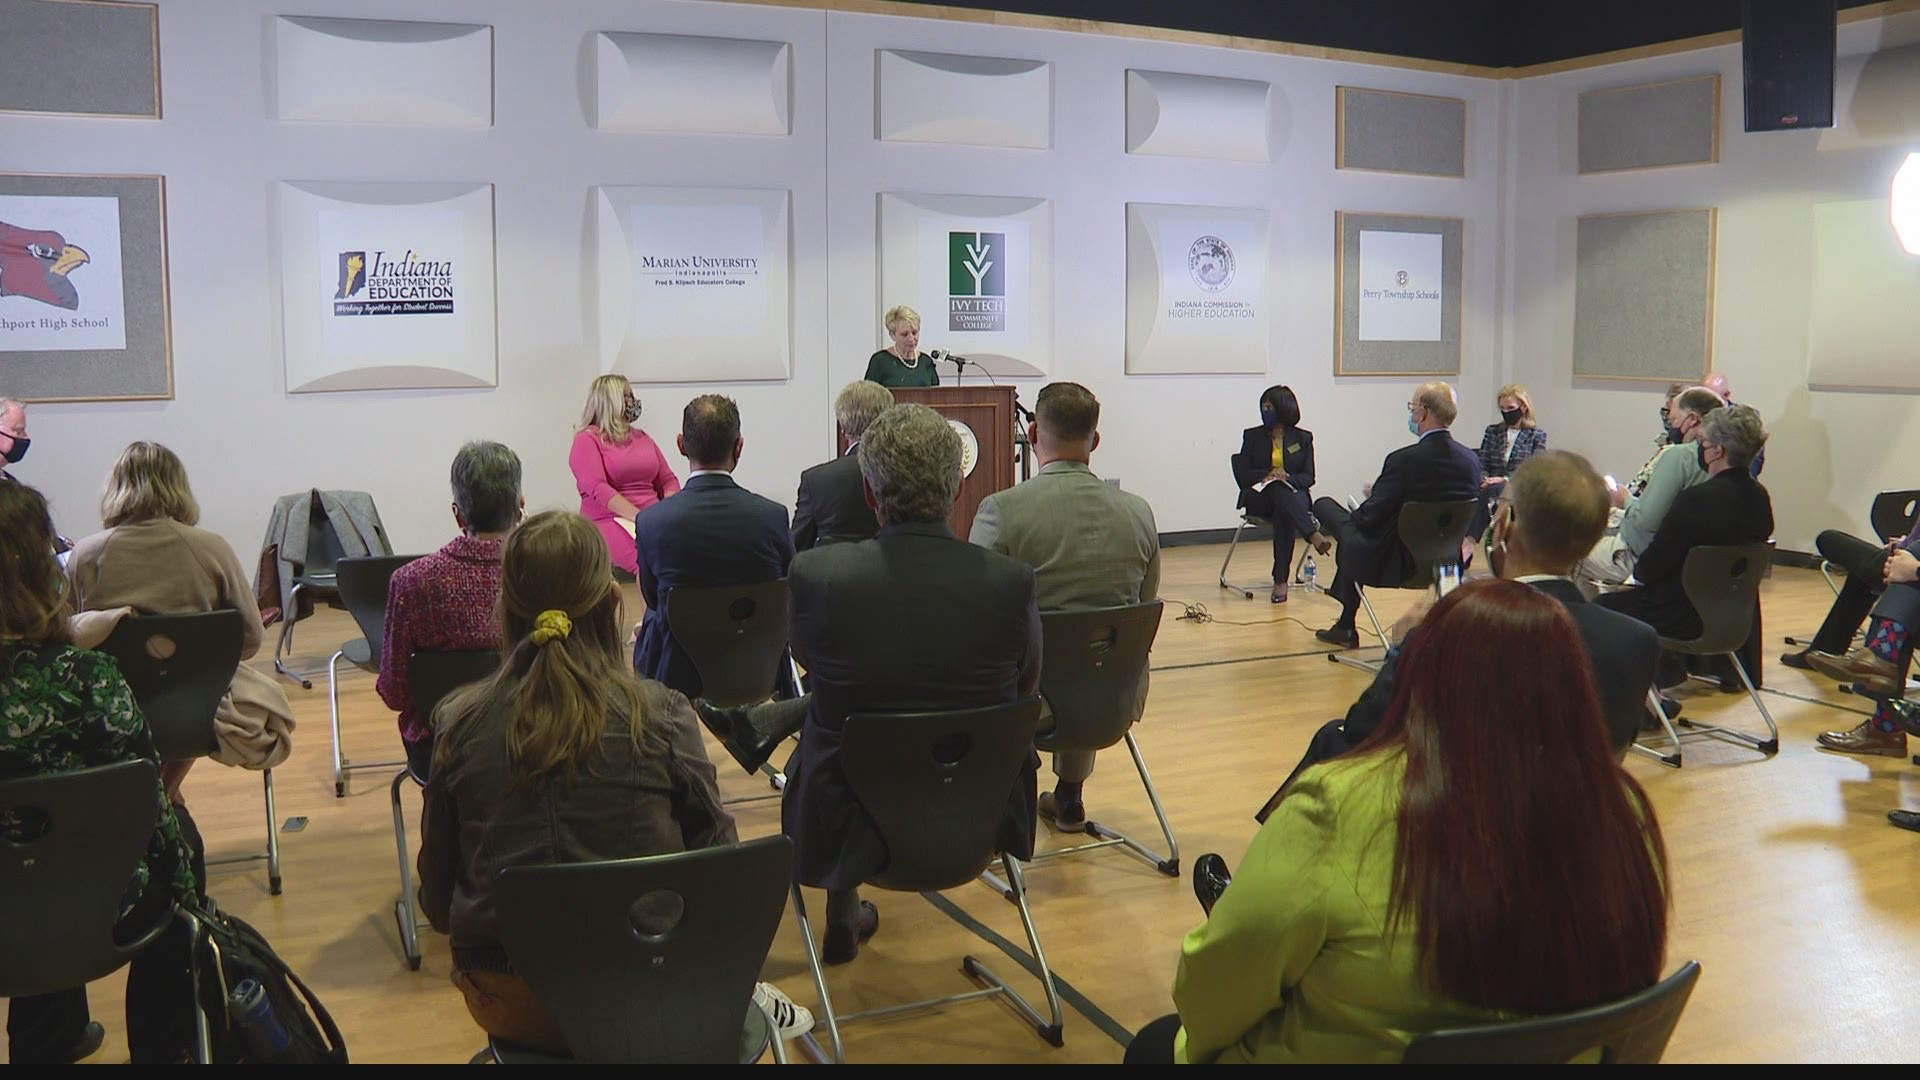 Marian University and Ivy Tech are teaming up to bring a more diverse group of teachers to Indiana to help with the teacher shortage.